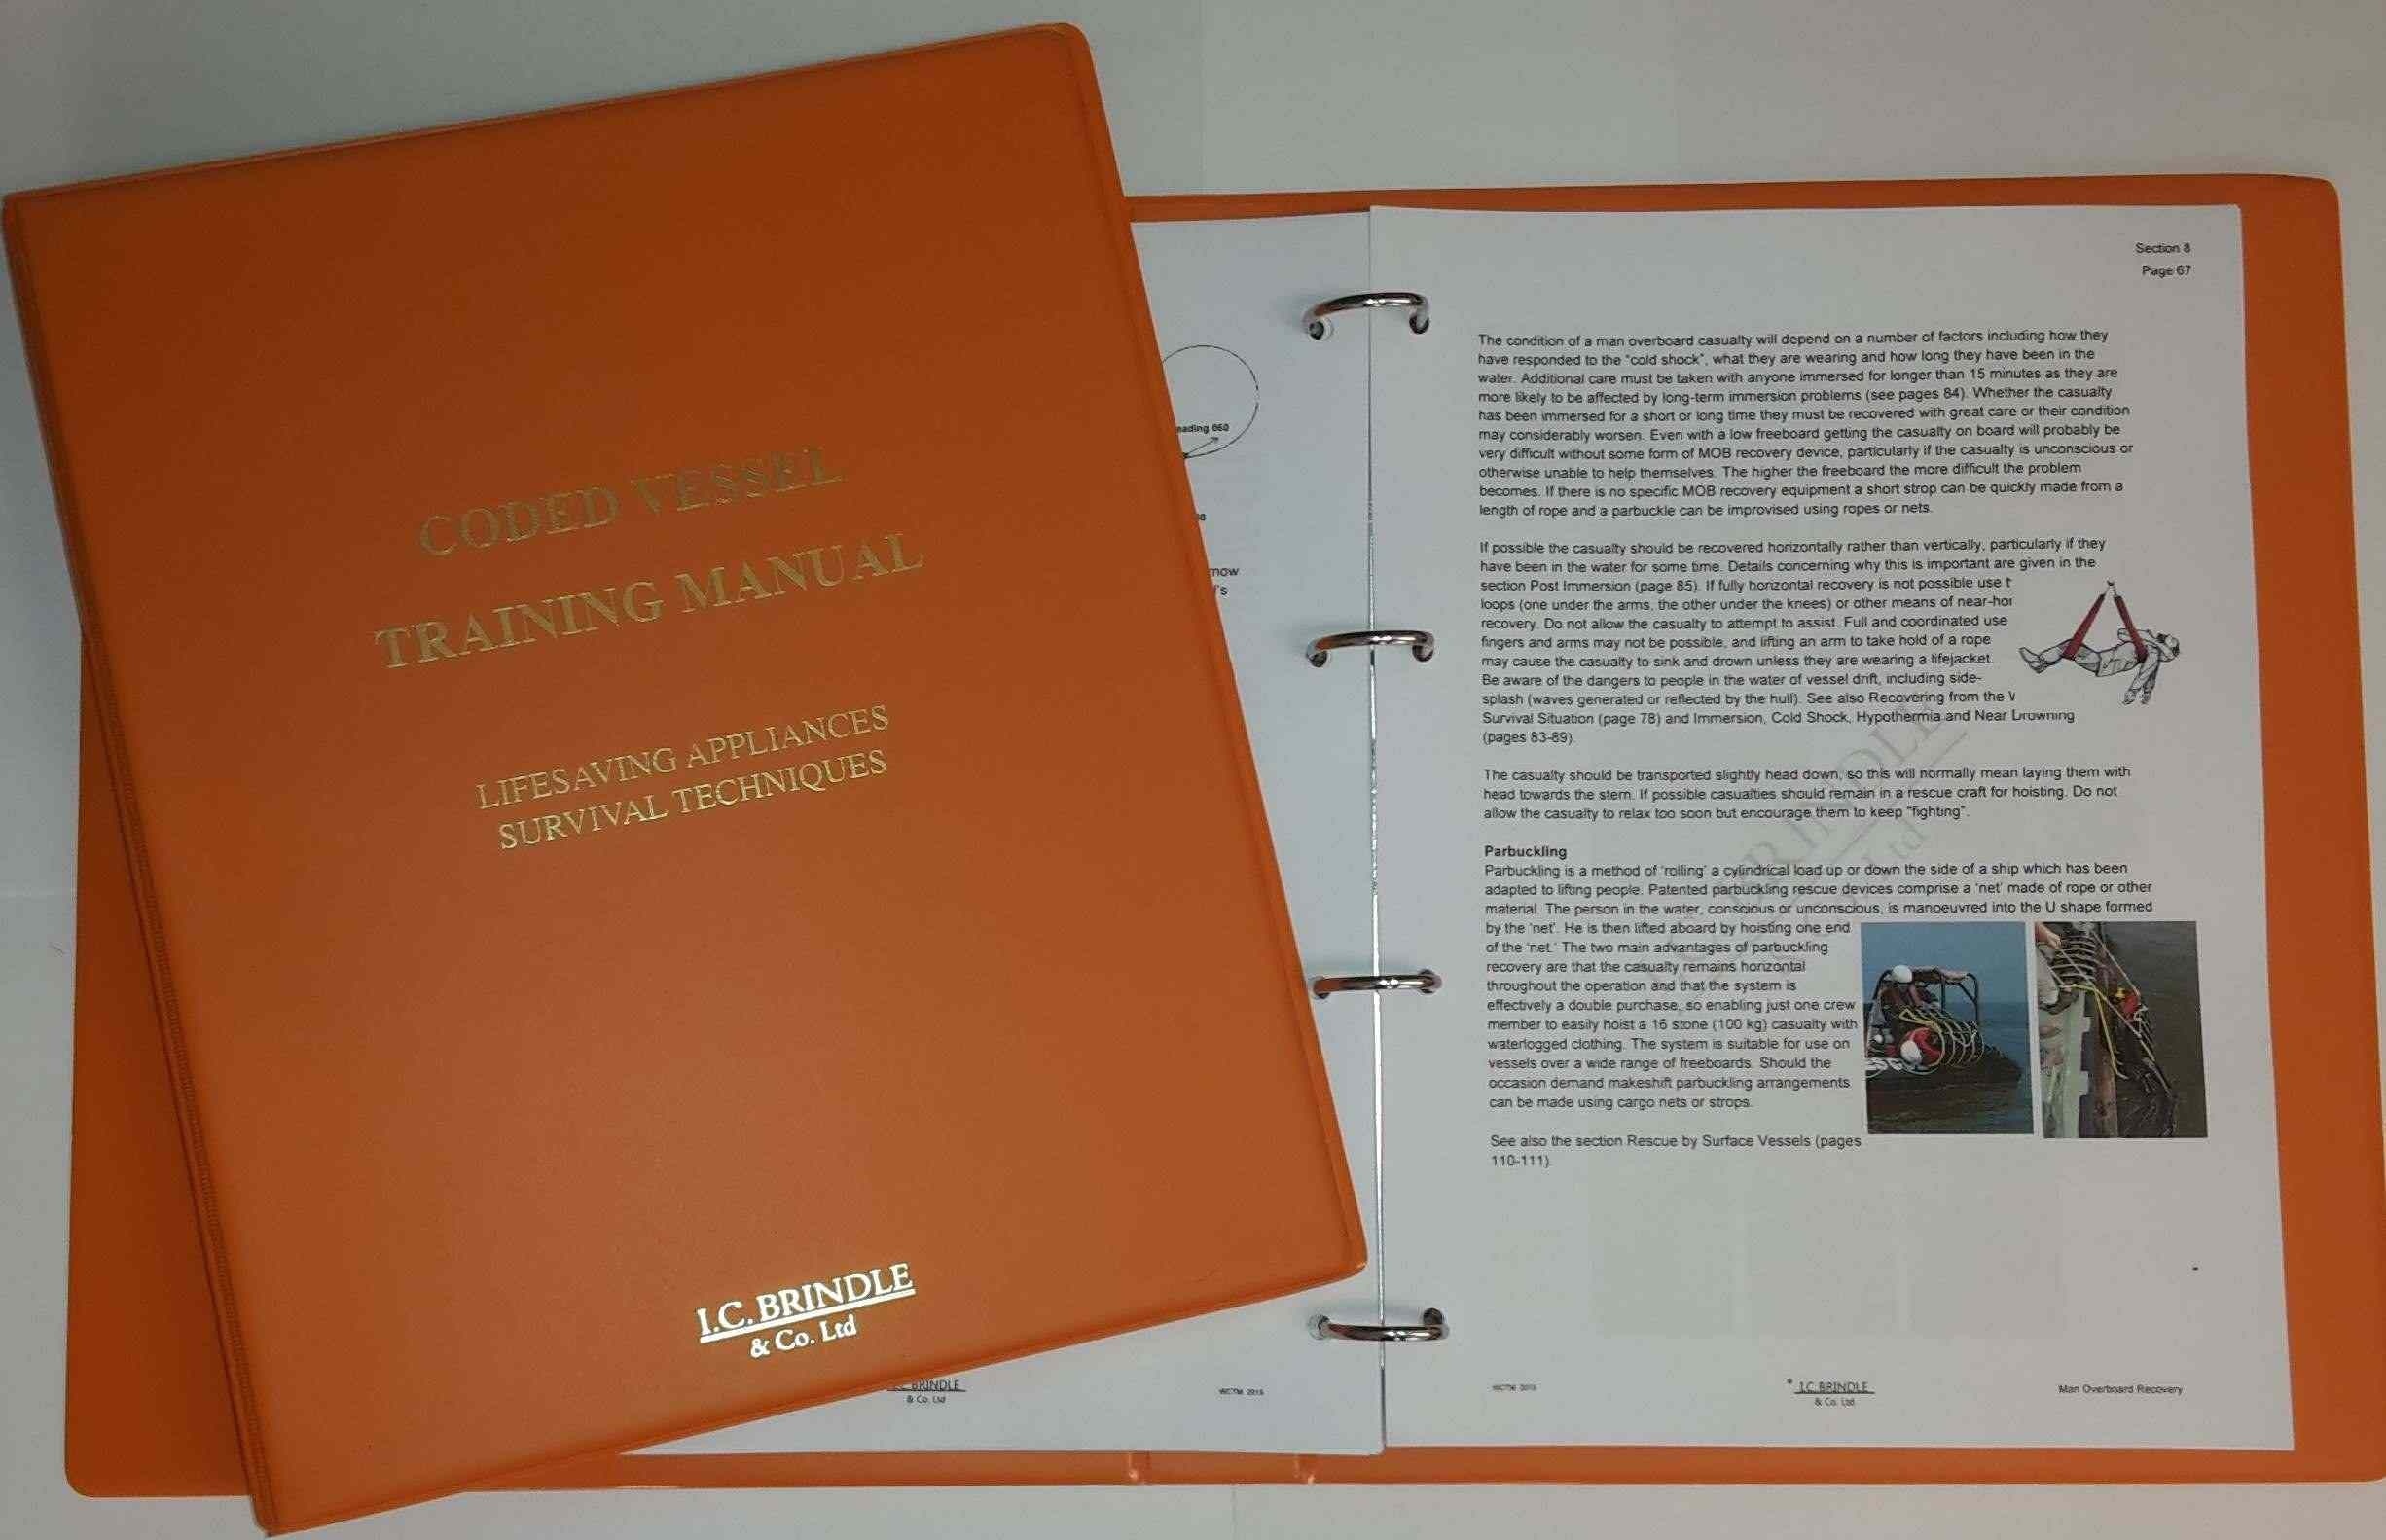 Workboat code 2 Training Manual 2021-Lifesaving appliances and Survive Techniques